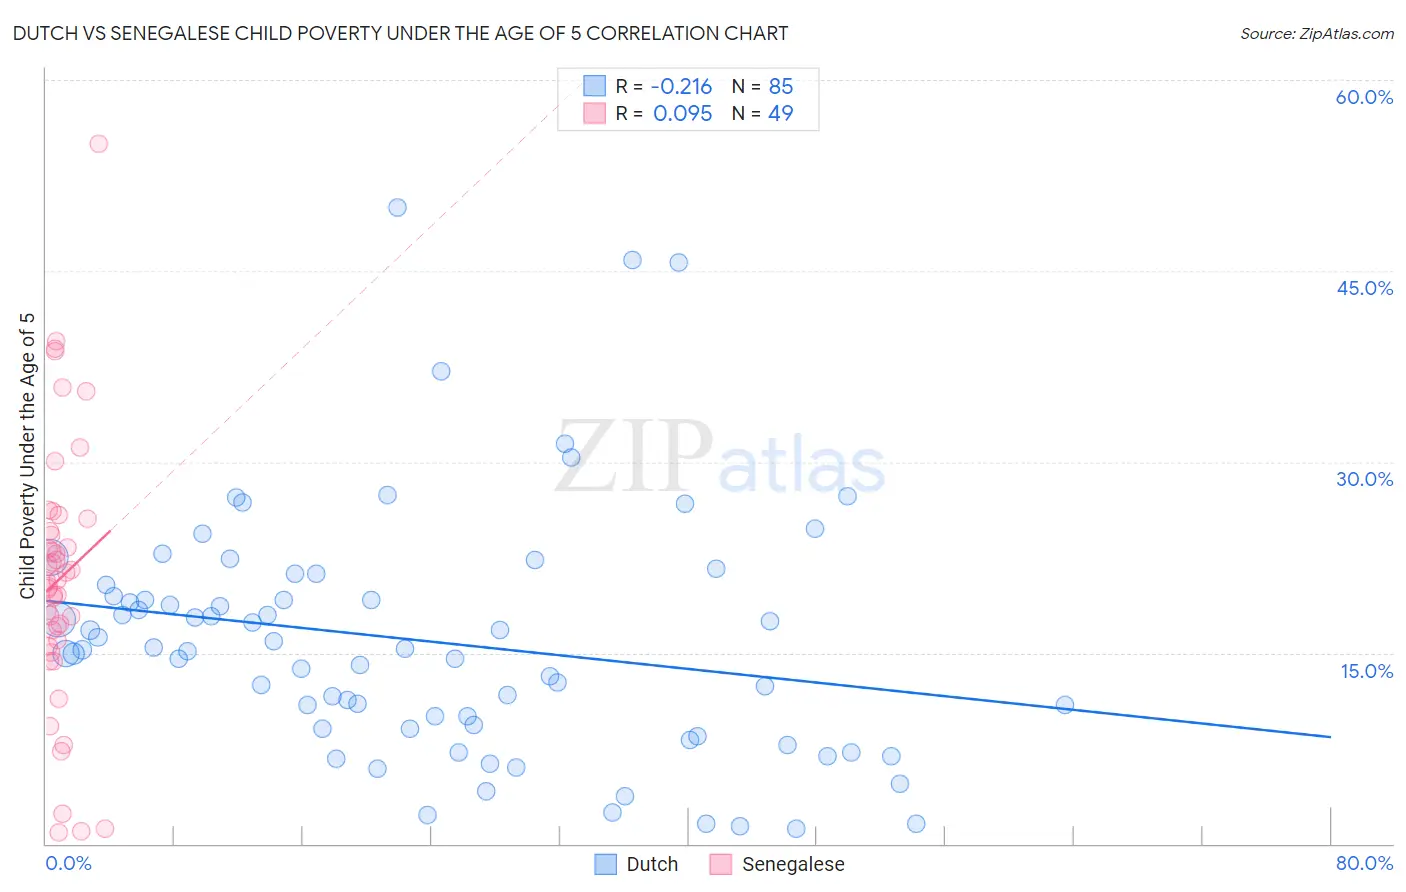 Dutch vs Senegalese Child Poverty Under the Age of 5